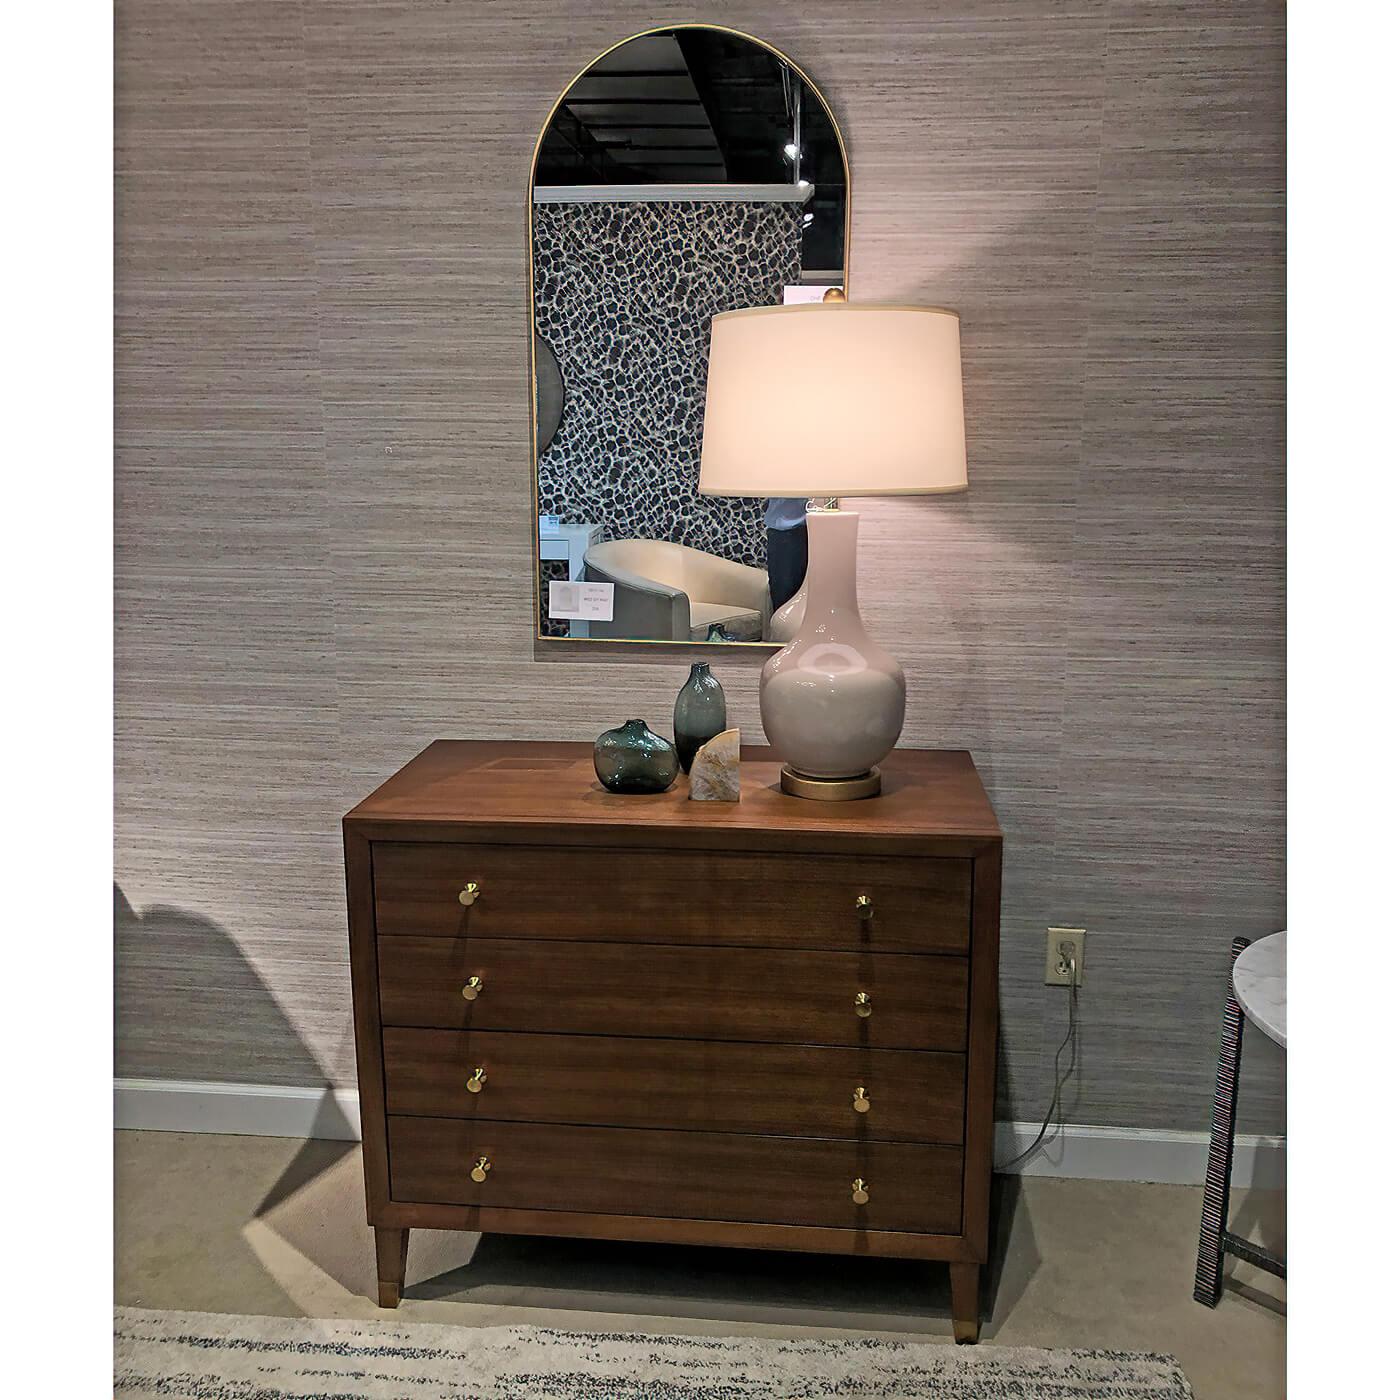 Midcentury style beveled chest with solid walnut frame, four drawers, polished brass hardware, with a hand-rubbed sophisticated “truffle” brown stain that accentuates the clear light and dark tones of the quarter cut walnut veneer and solid walnut